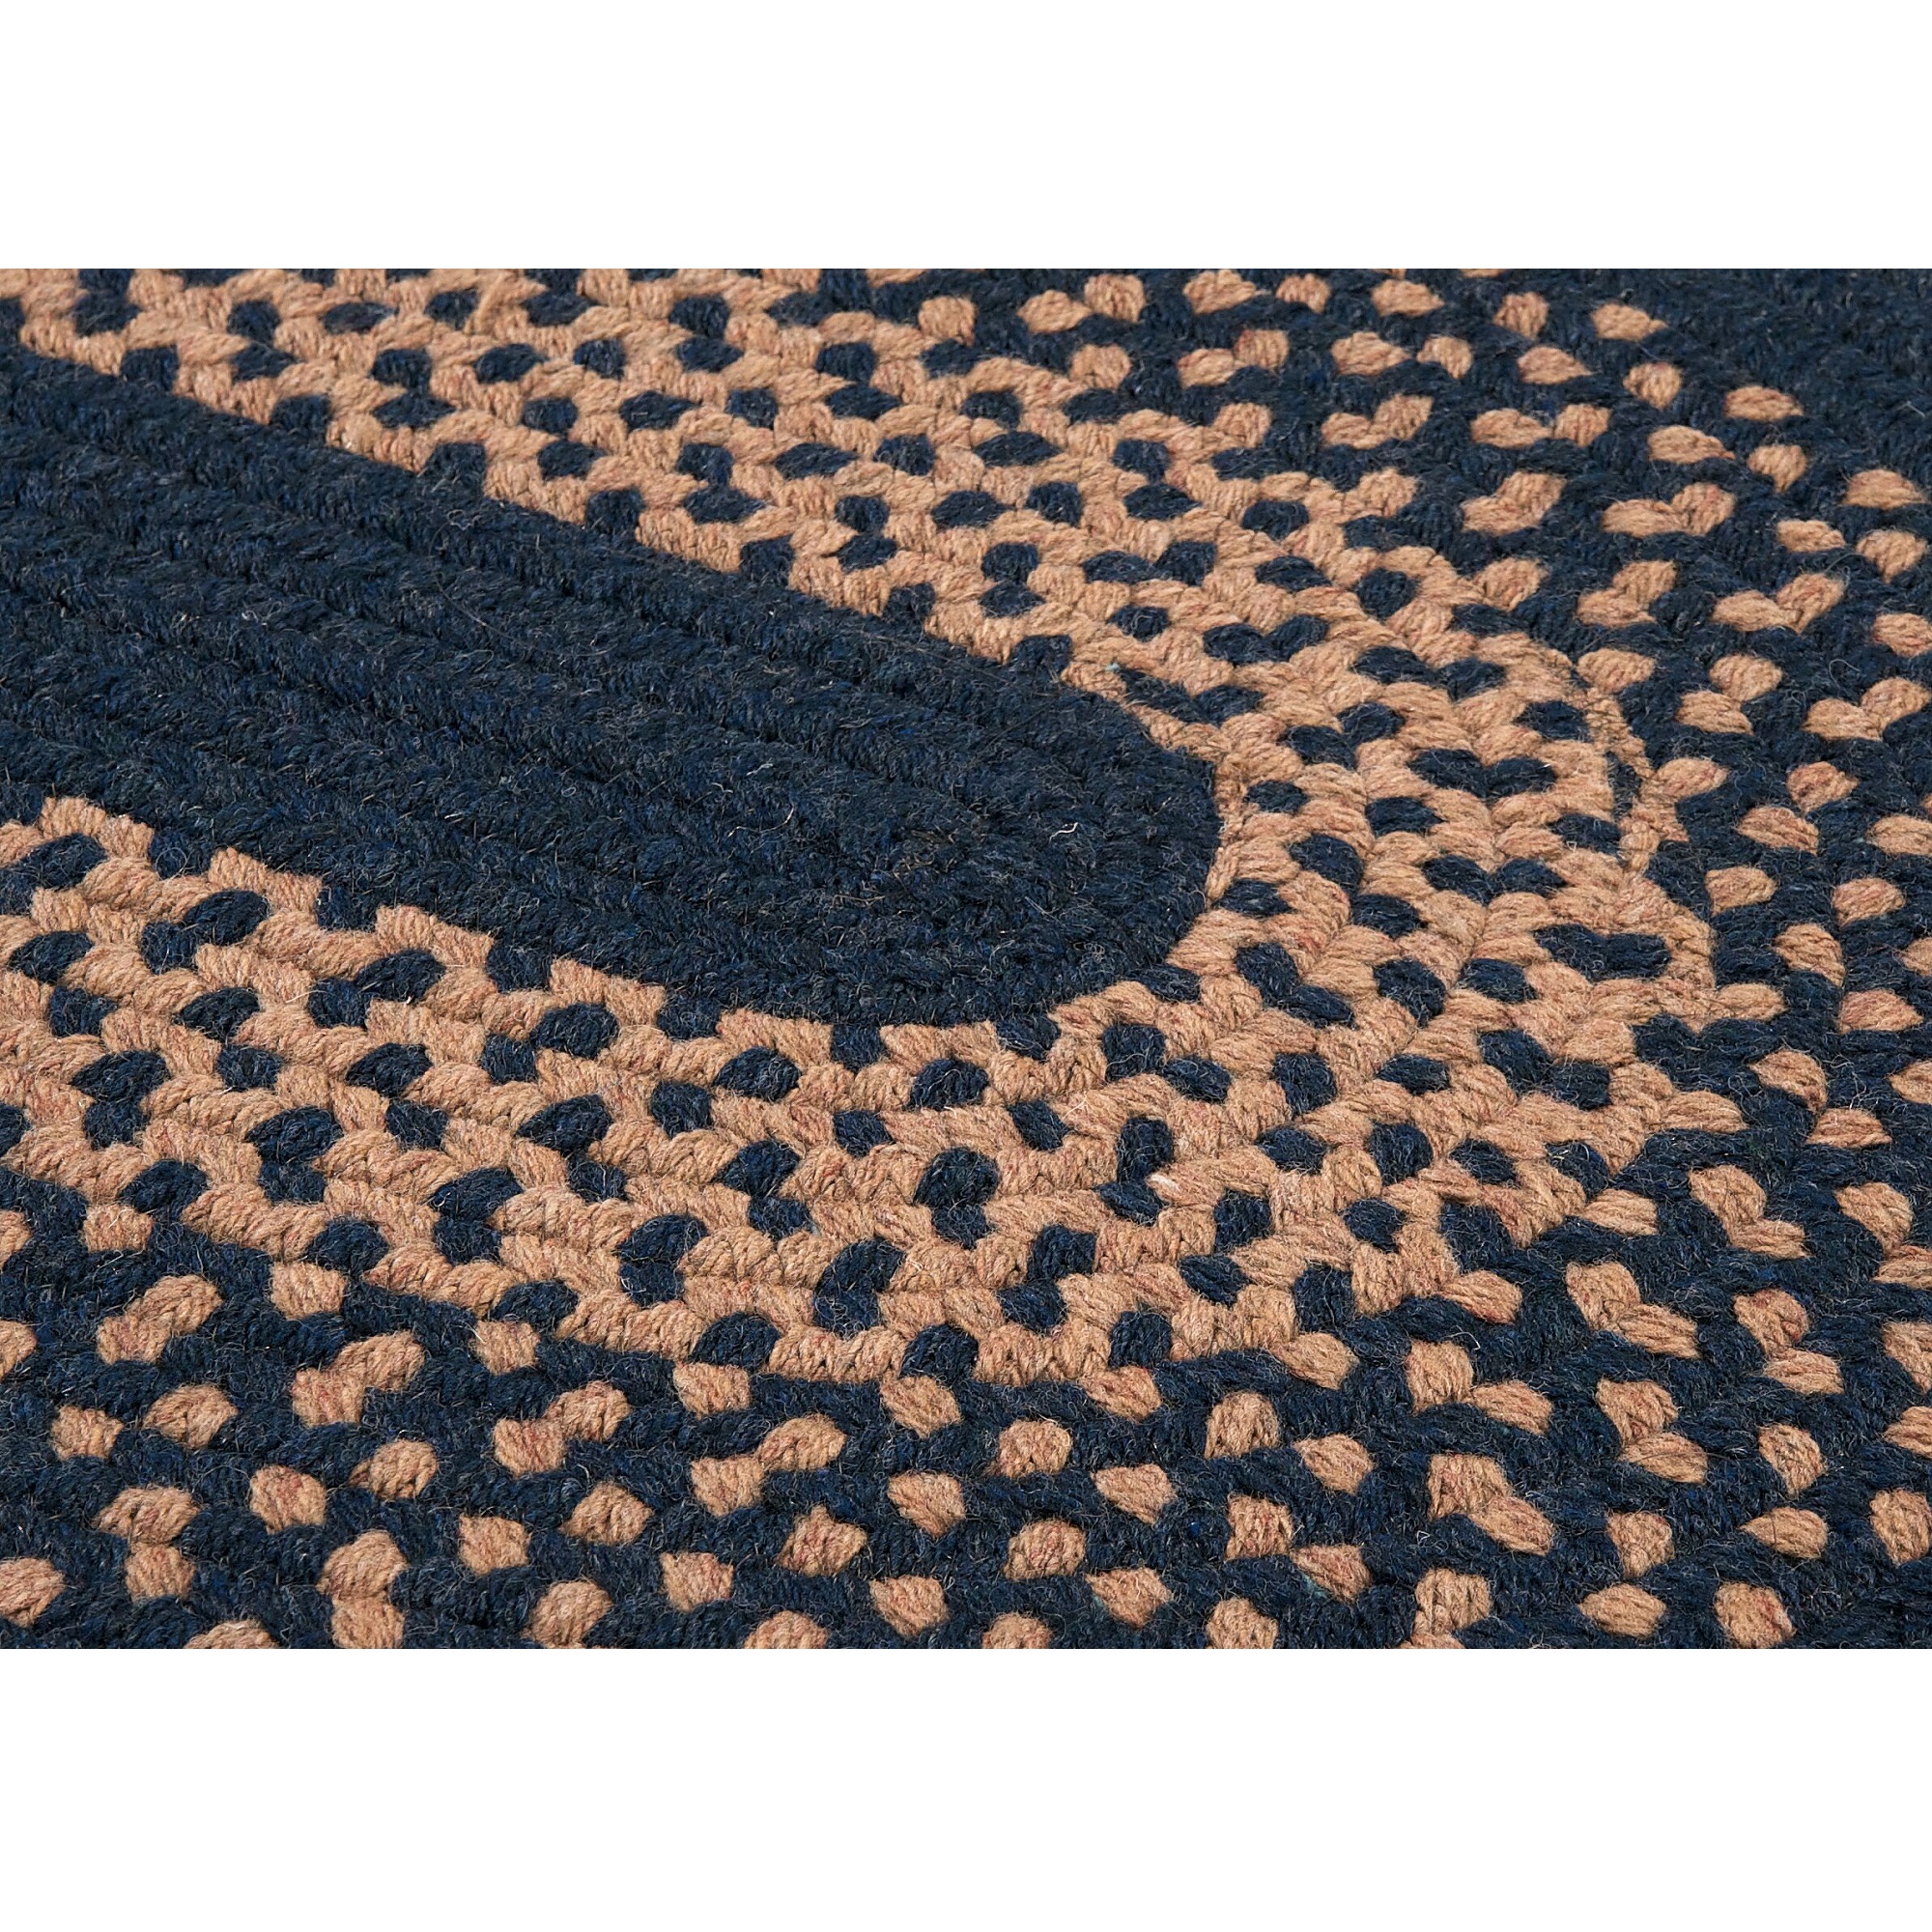 Colonial Mills 8' x 11' Blue and Beige Braided Oval Area Throw Rug